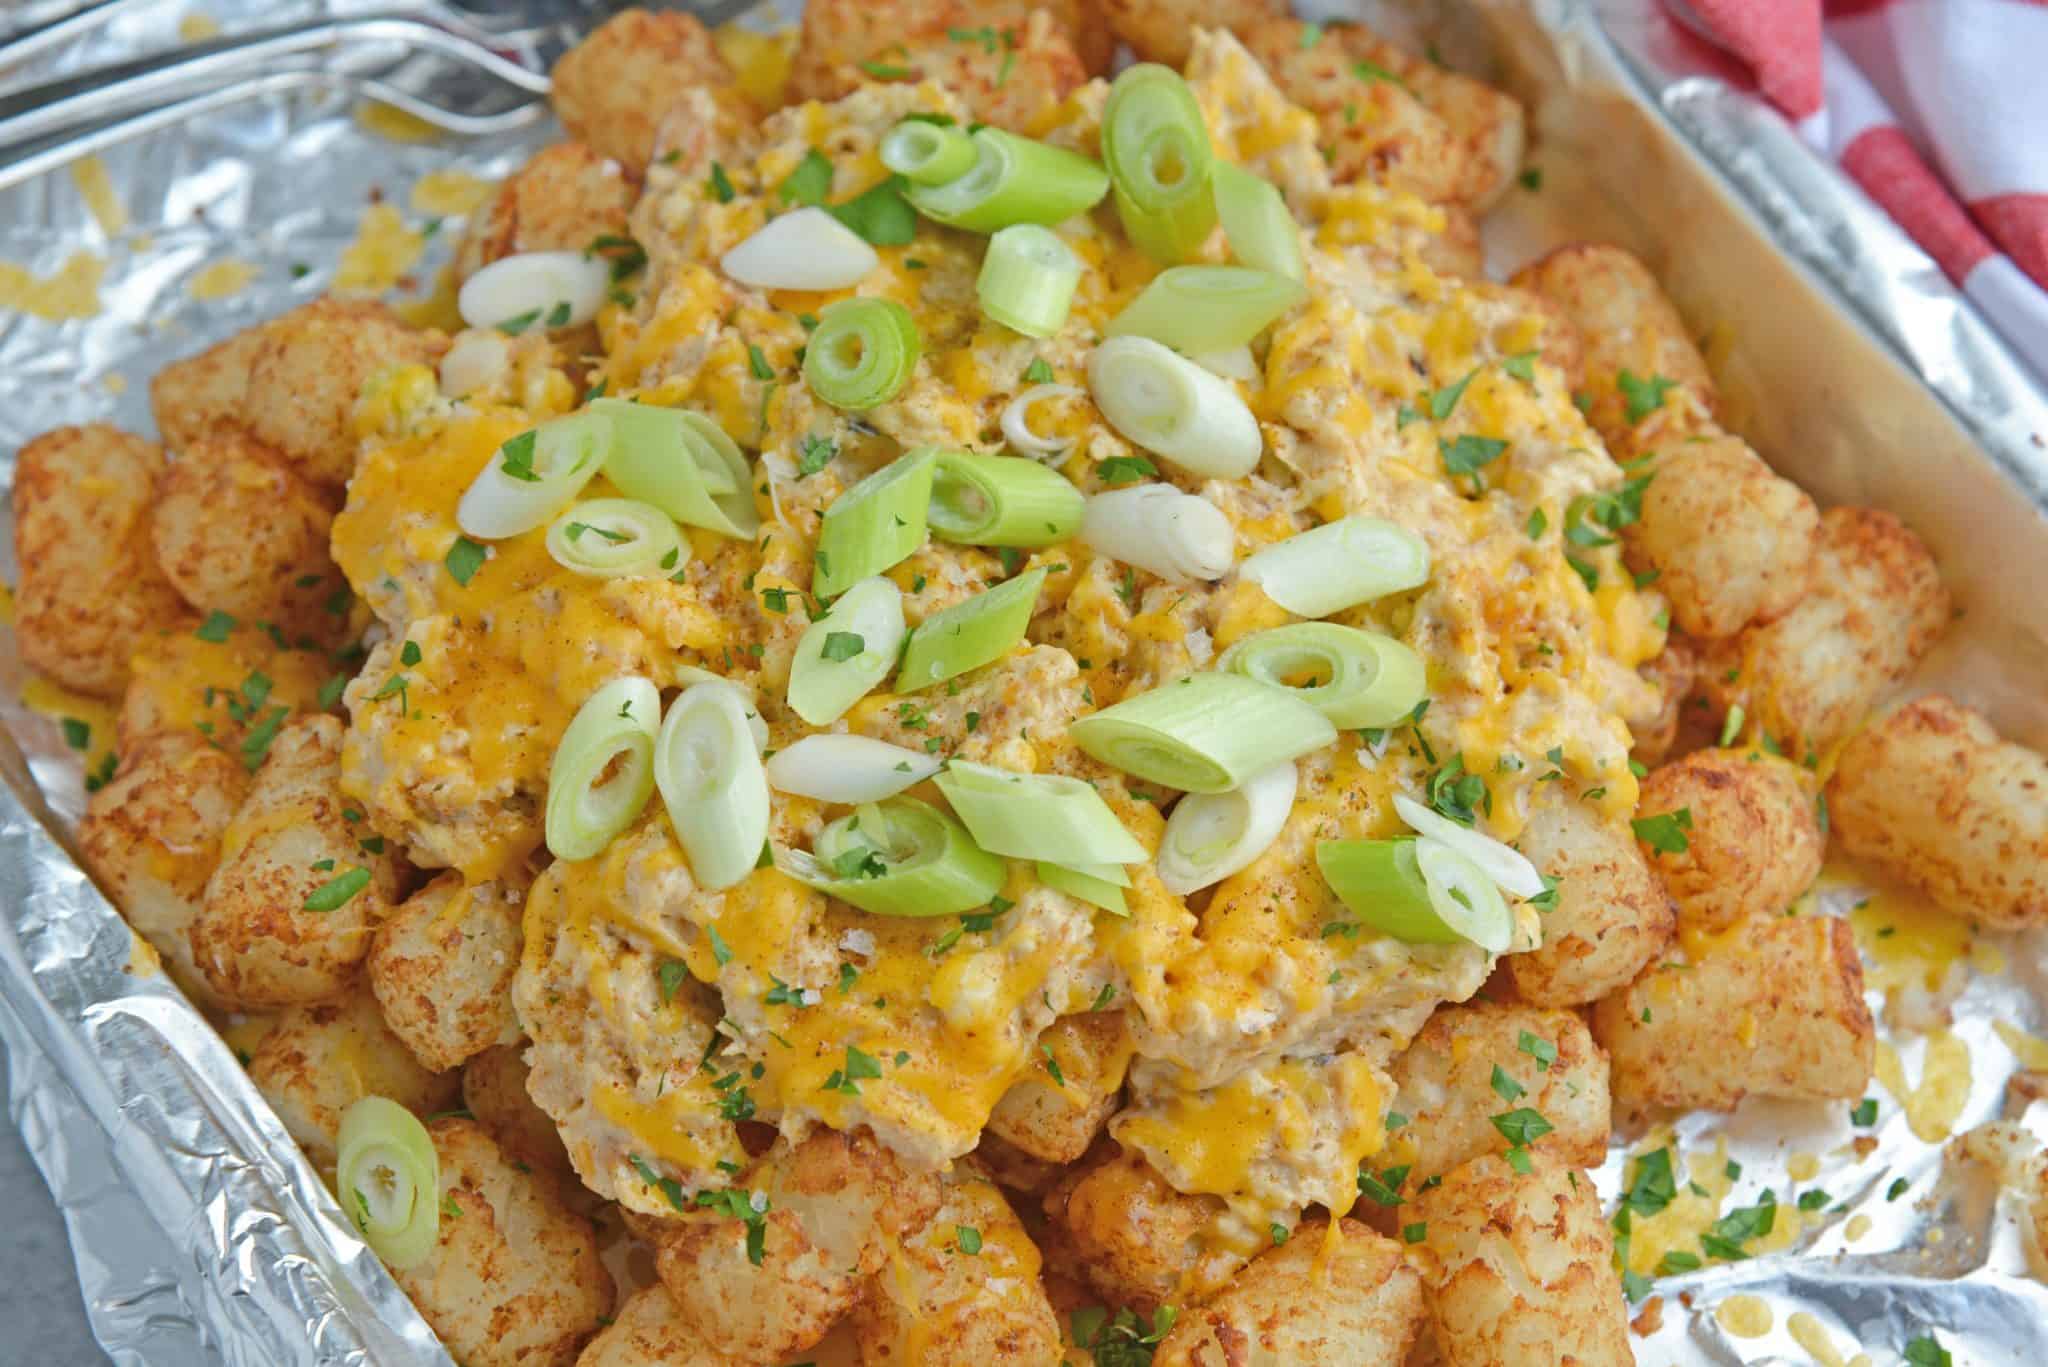 Crabby Totchos are crispy fried tater tots smothered in hot crab dip and topped with melty cheddar cheese. The perfect party appetizer! #tatertots #easyappetizerrecipes www.savoryexperiments.com